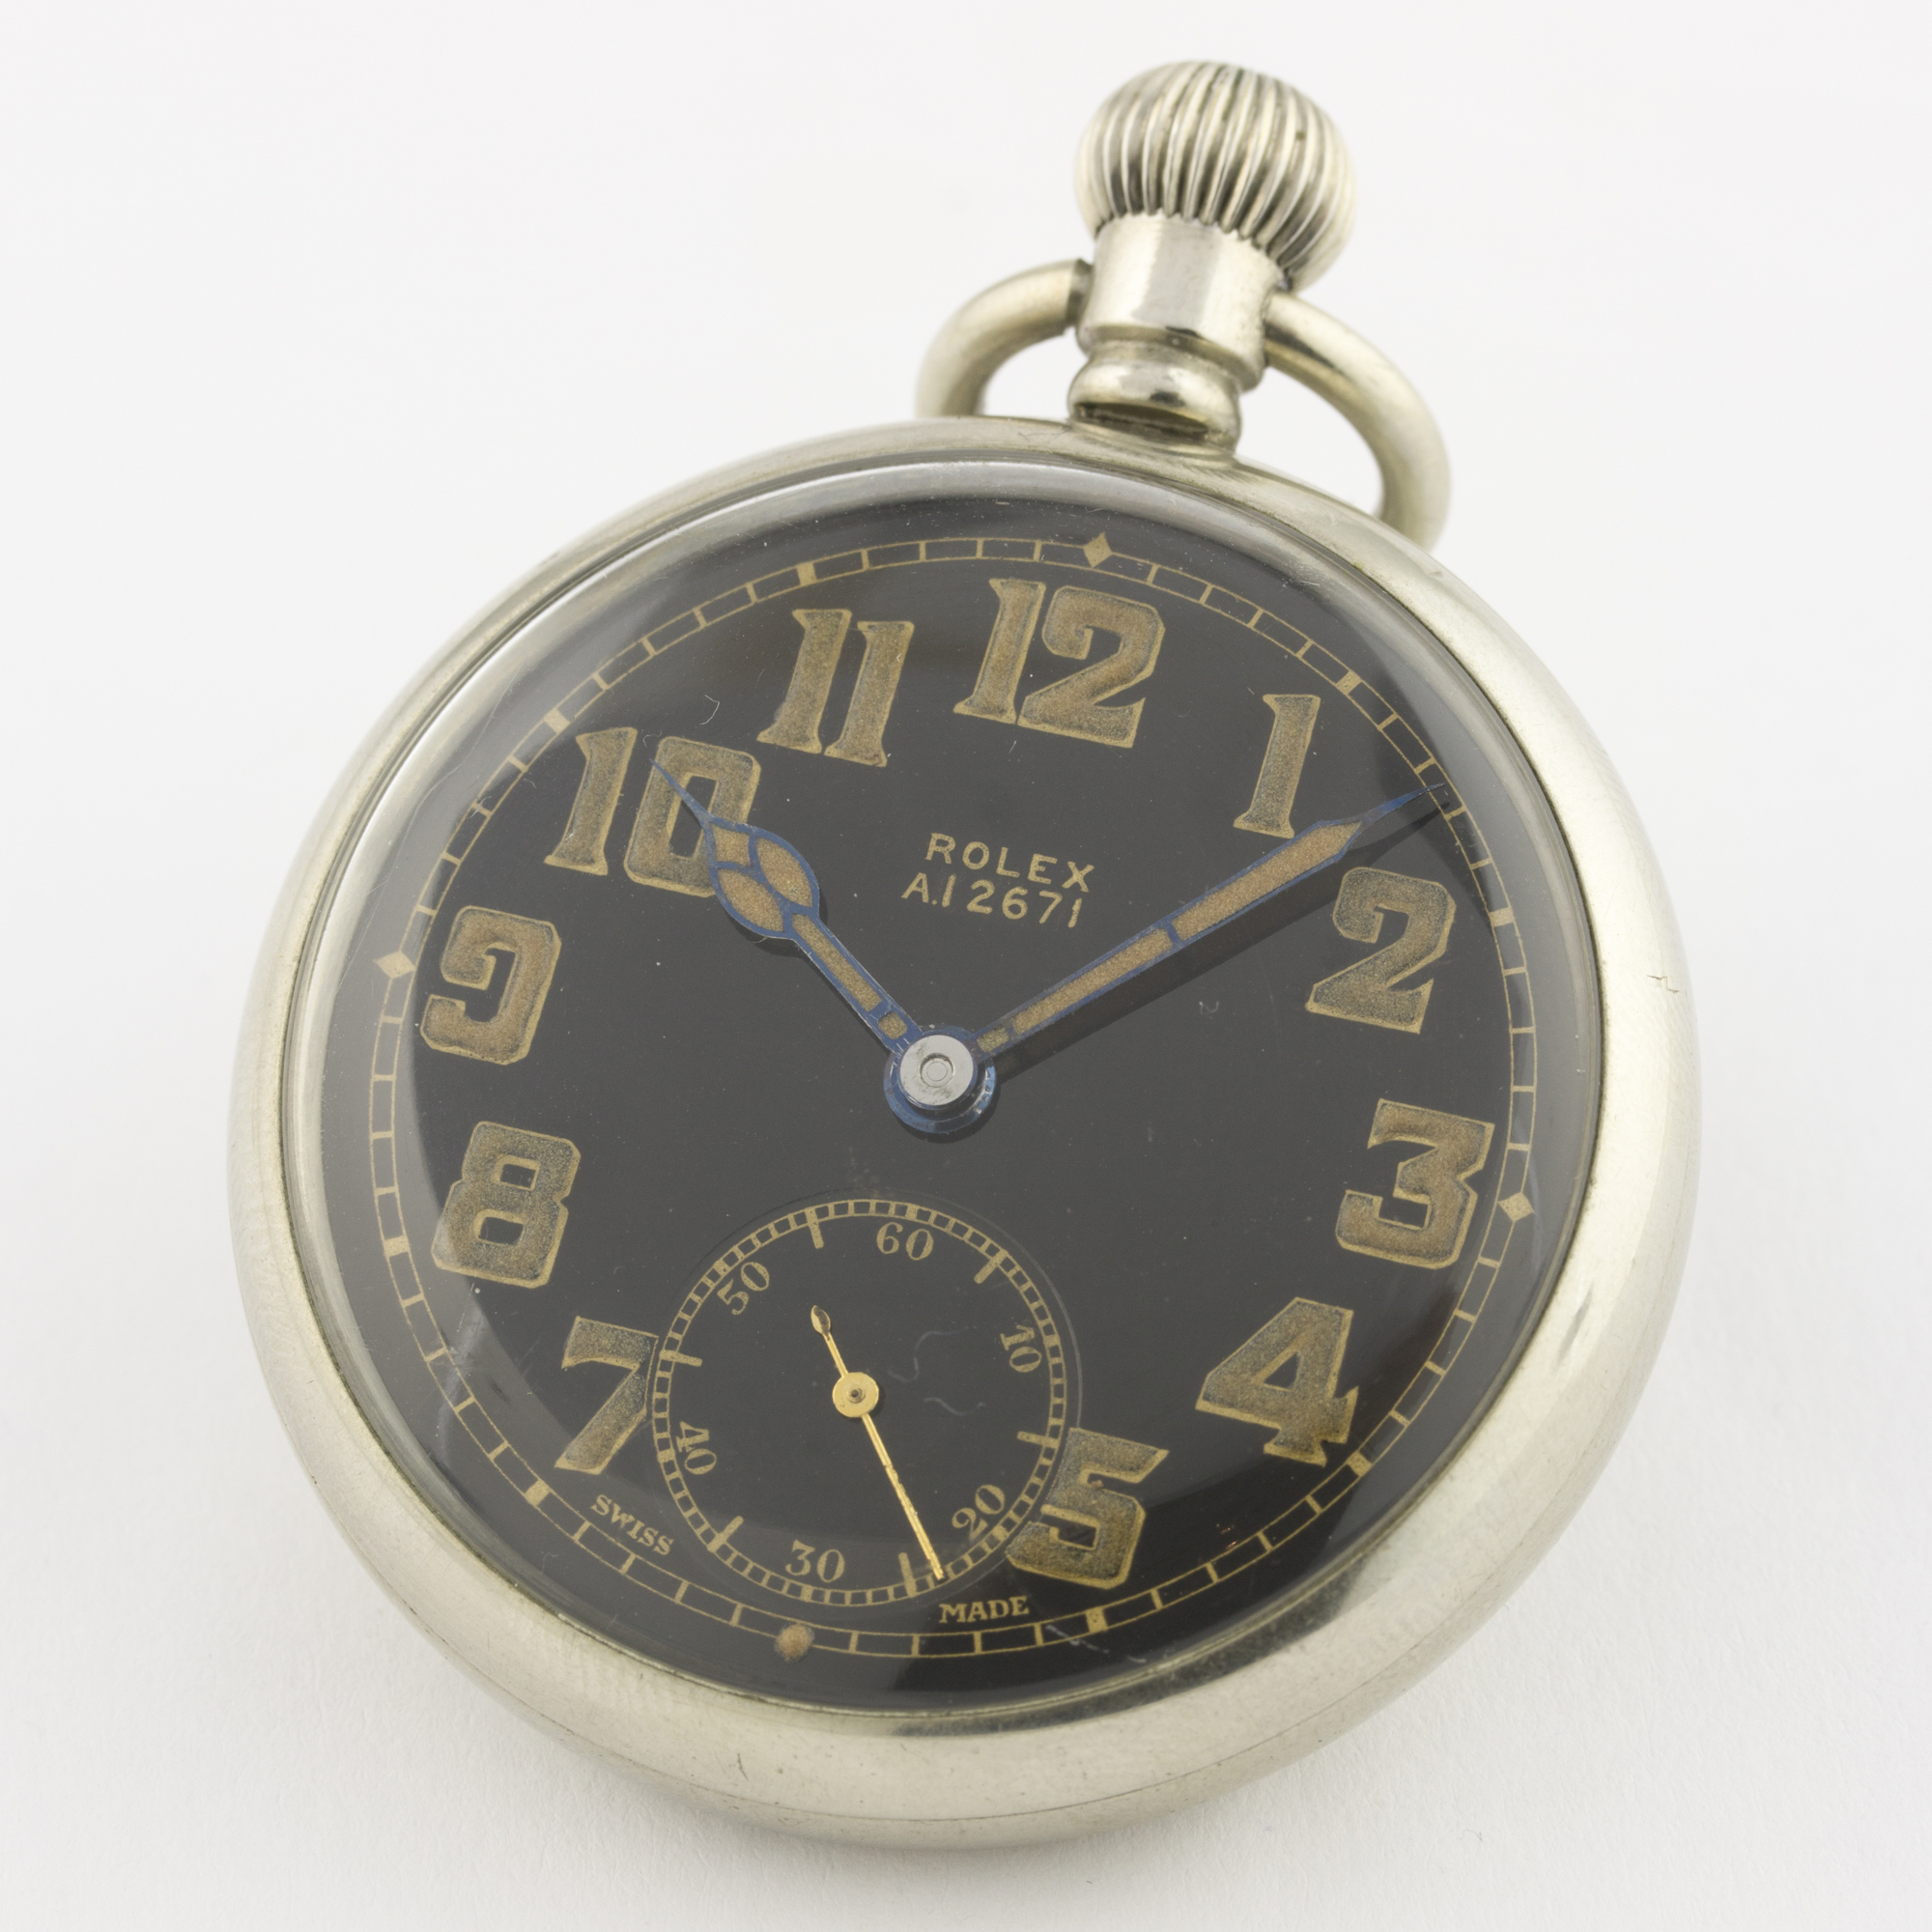 A GENTLEMAN'S NICKEL CASED ROLEX BRITISH MILITARY POCKET WATCH CIRCA 1930s D: Black enamel dial with - Image 2 of 8